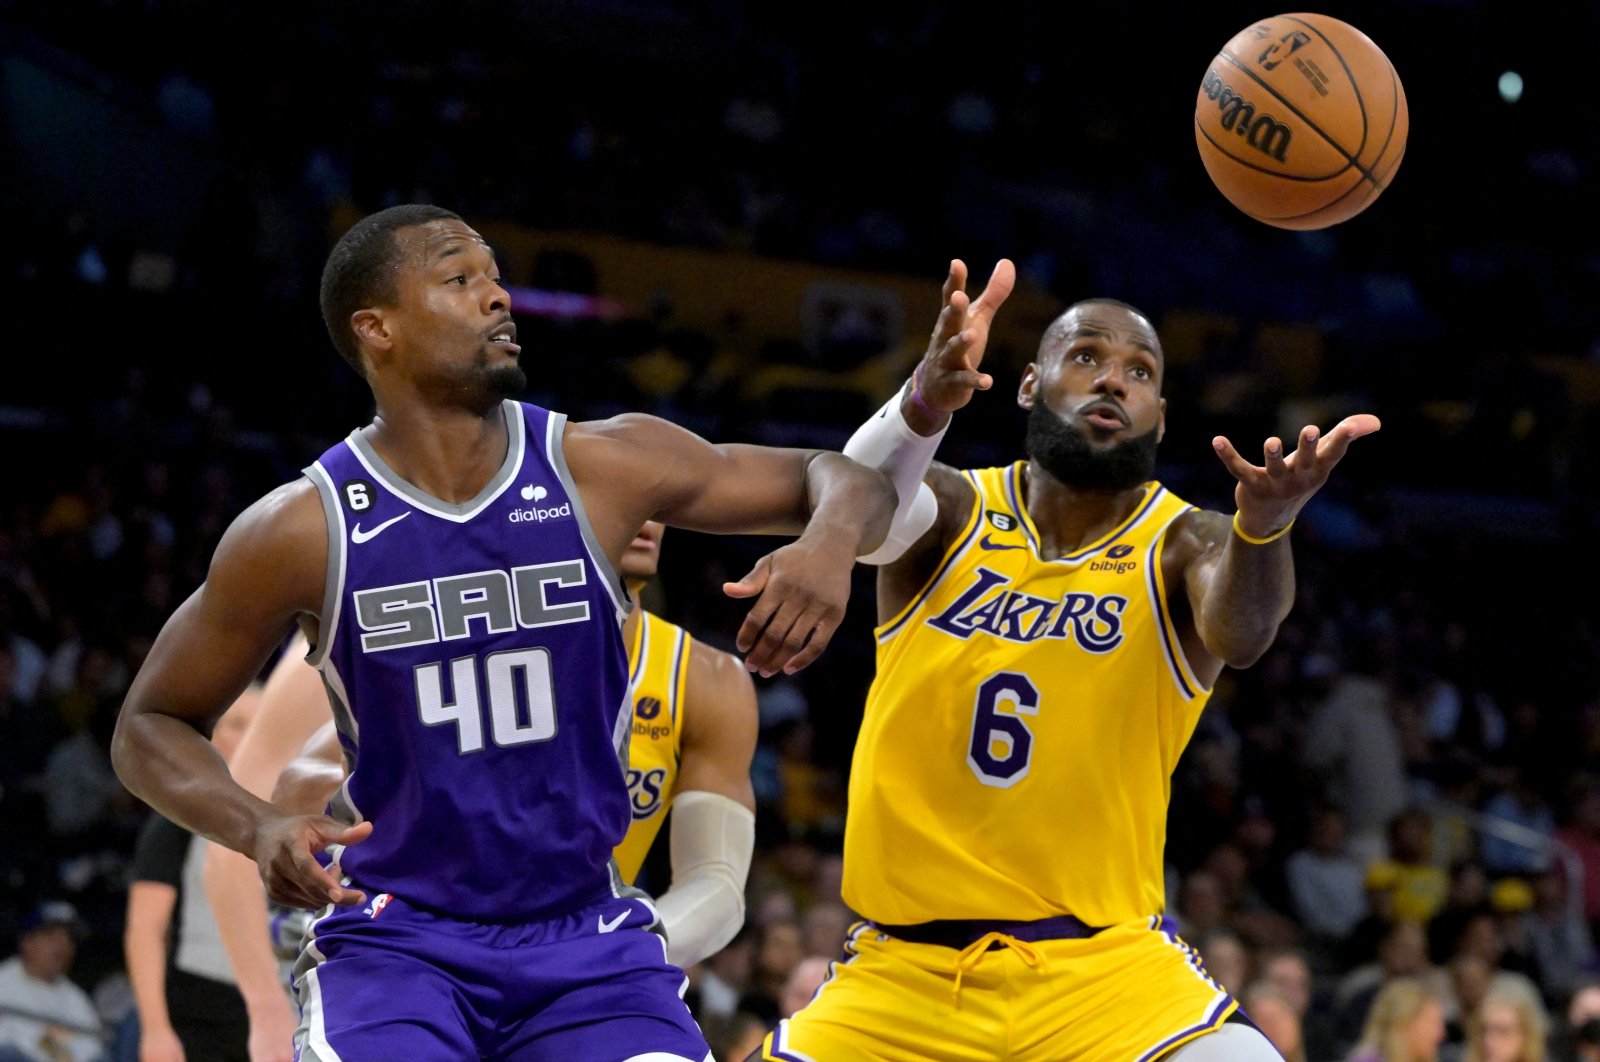 Los Angeles Lakers forward LeBron James (6) and Sacramento Kings forward Harrison Barnes (40) go for a rebound in the first half at Crypto.com Arena. Los Angeles, California, Oct. 3, 2022.  (USA TODAY Sports via REUTERS Photo)